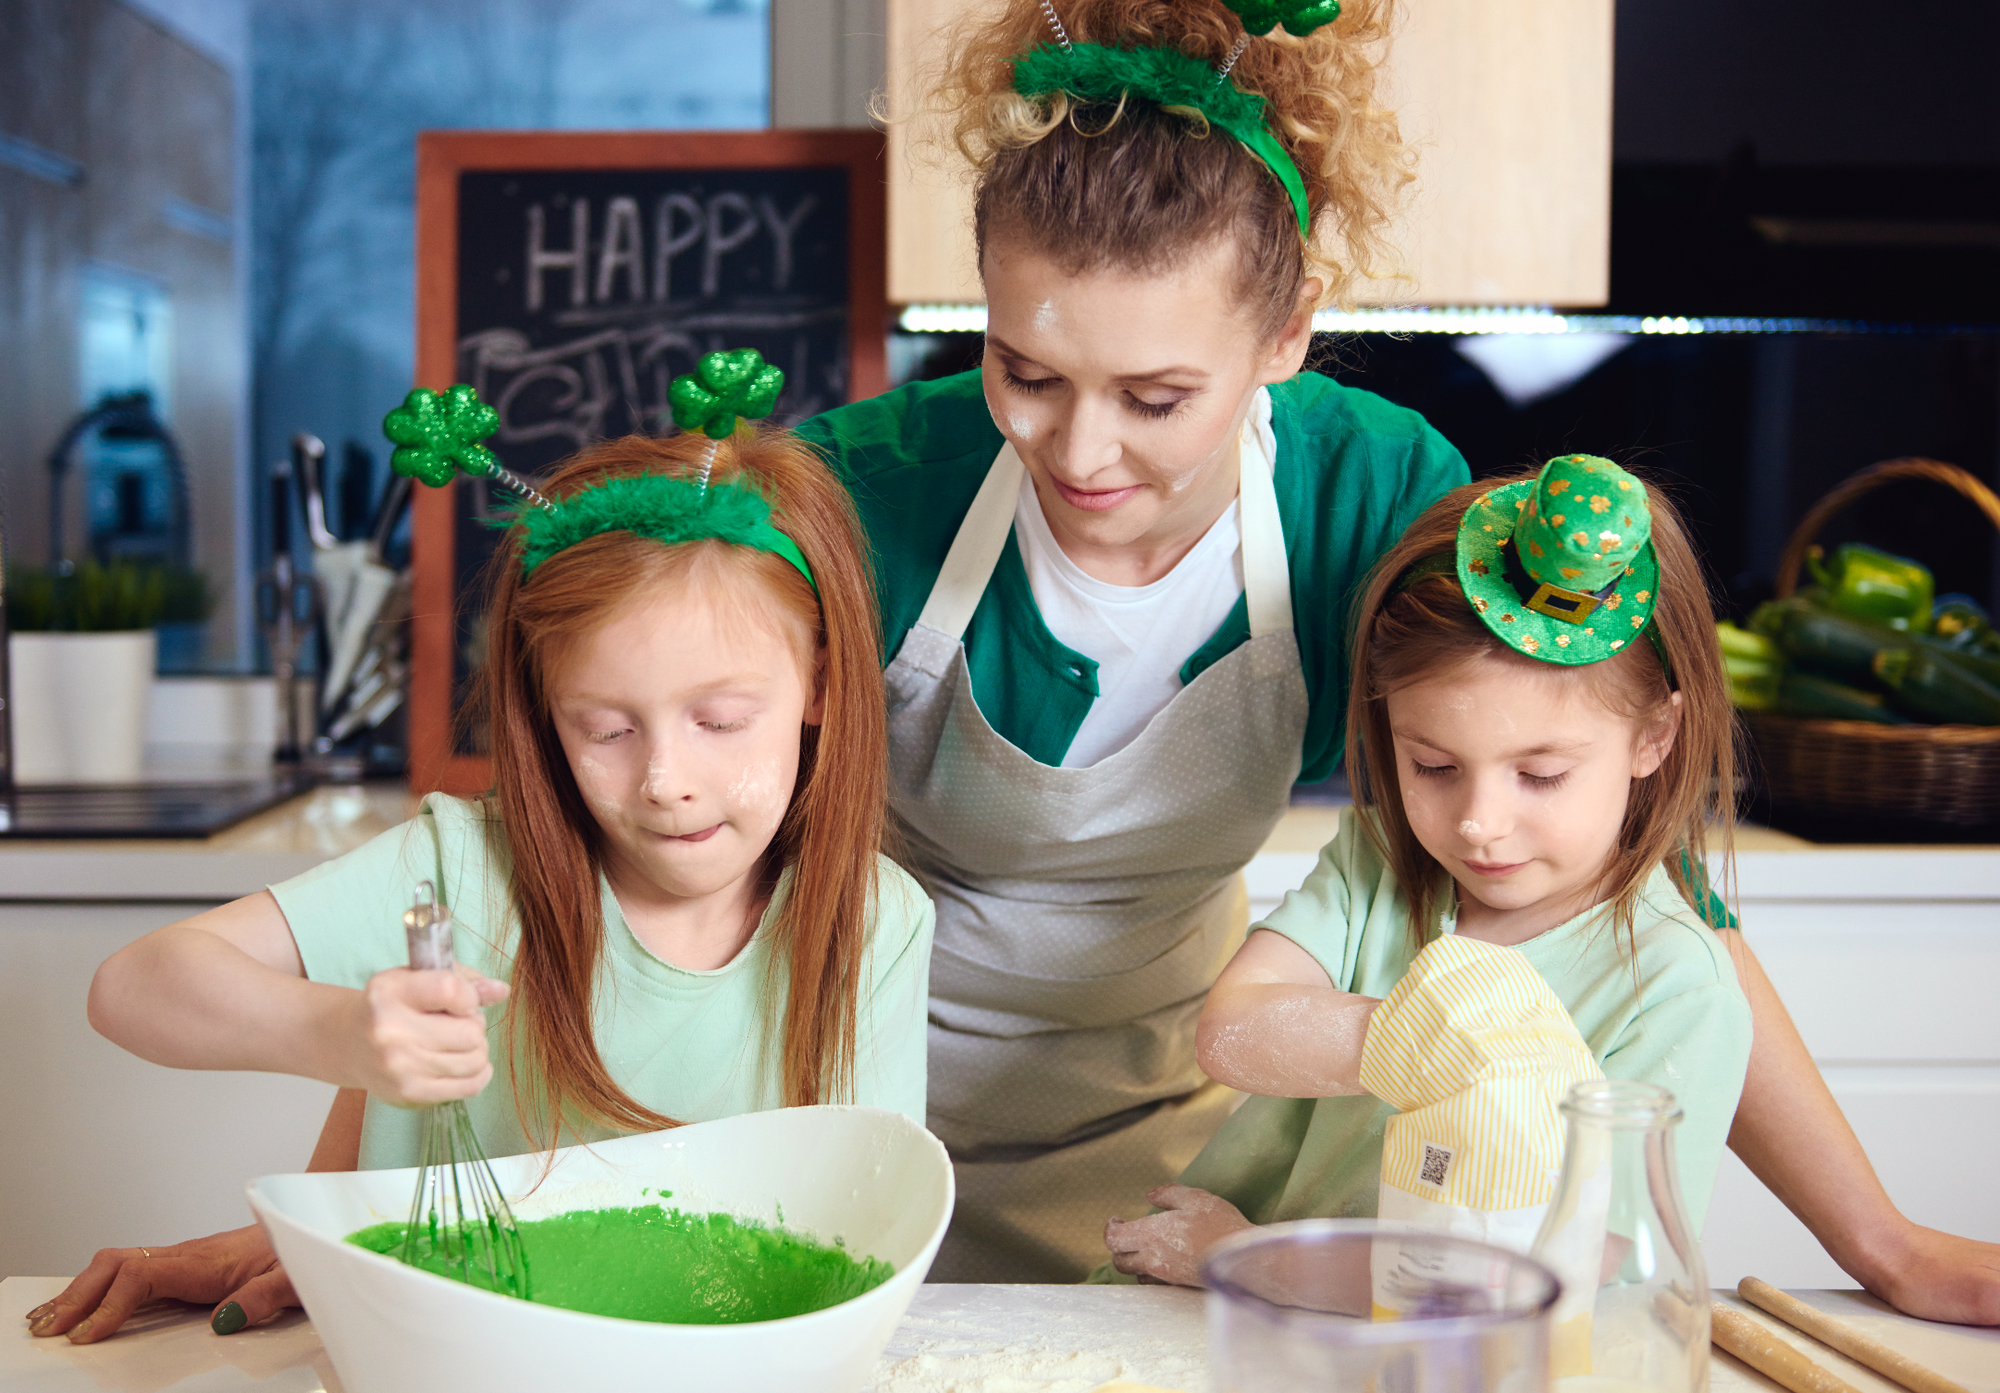 St. Patrick's Day Feast: From Sunrise to Sunset